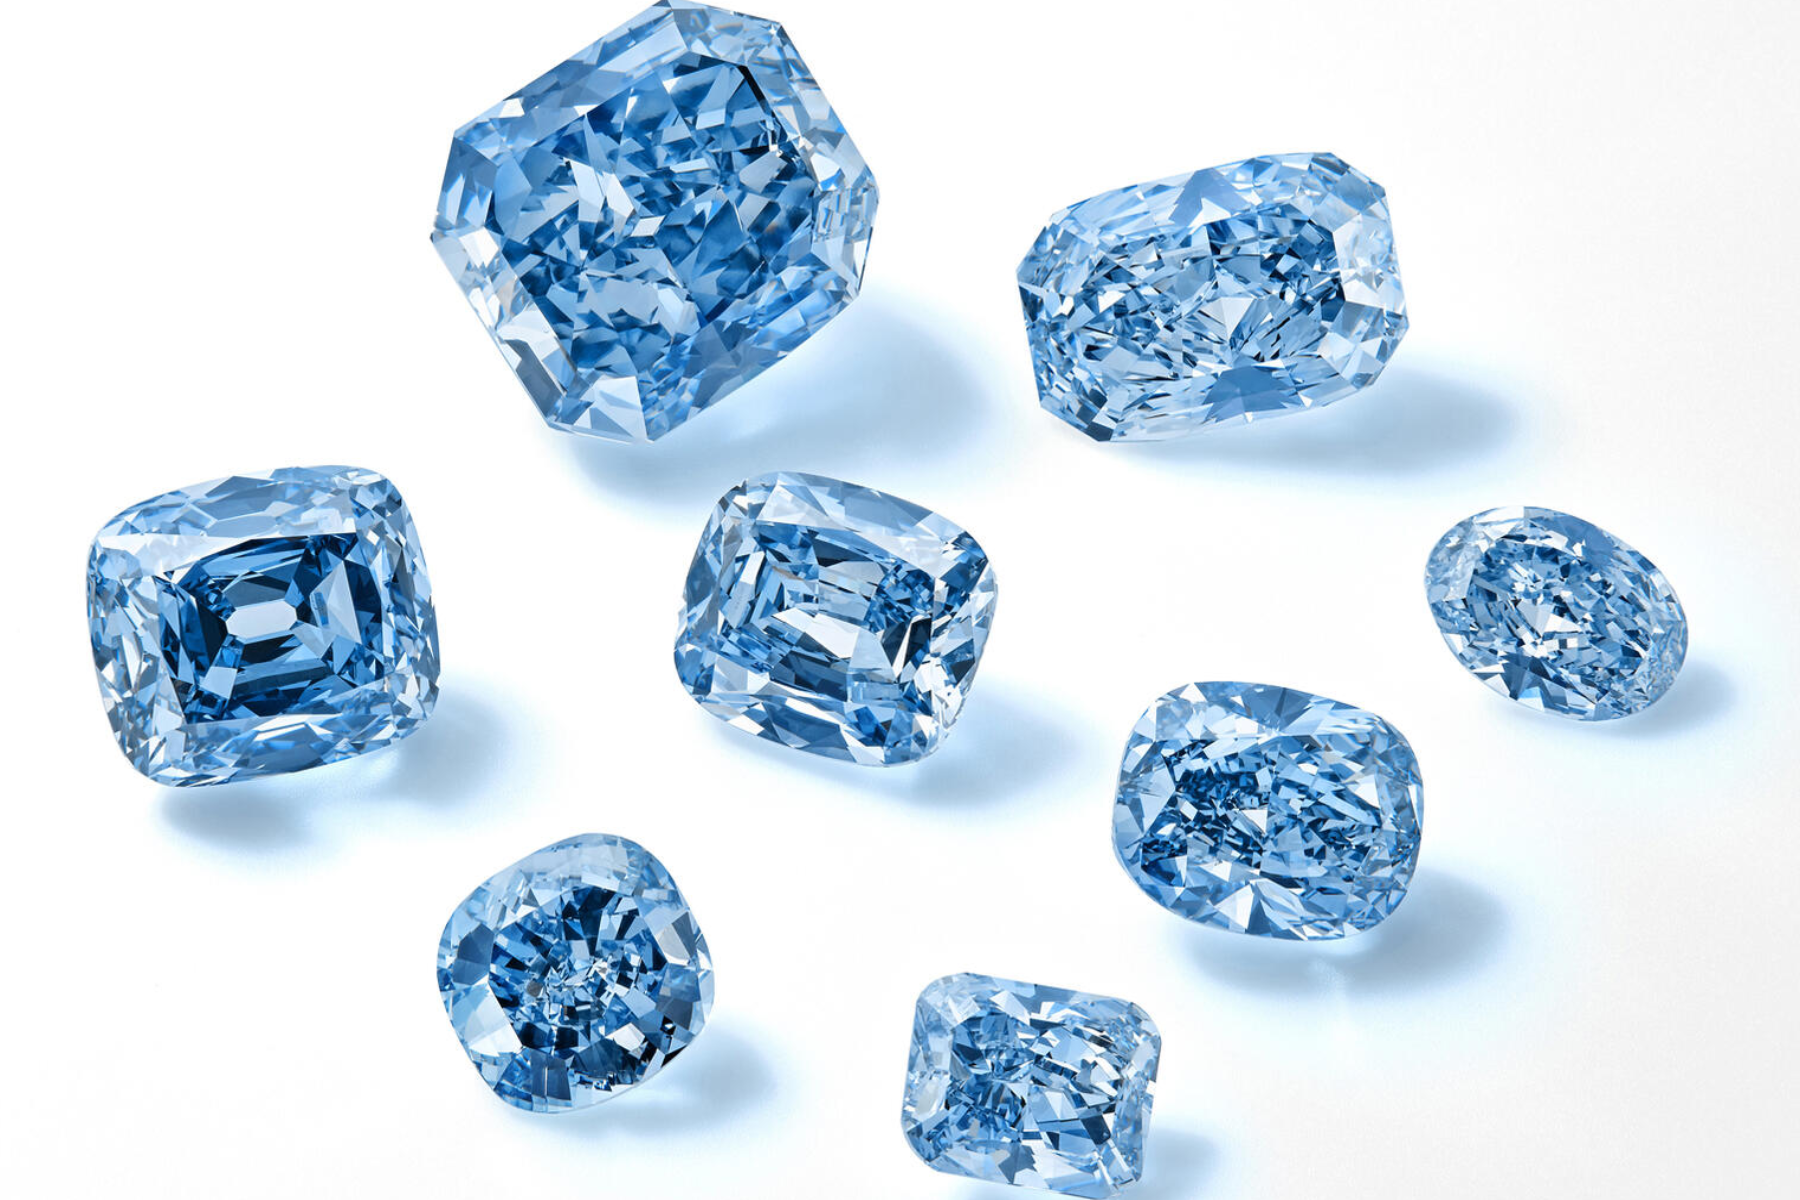 These 8 Blue Diamonds Worth $70m+ And Will Go Up For Auction